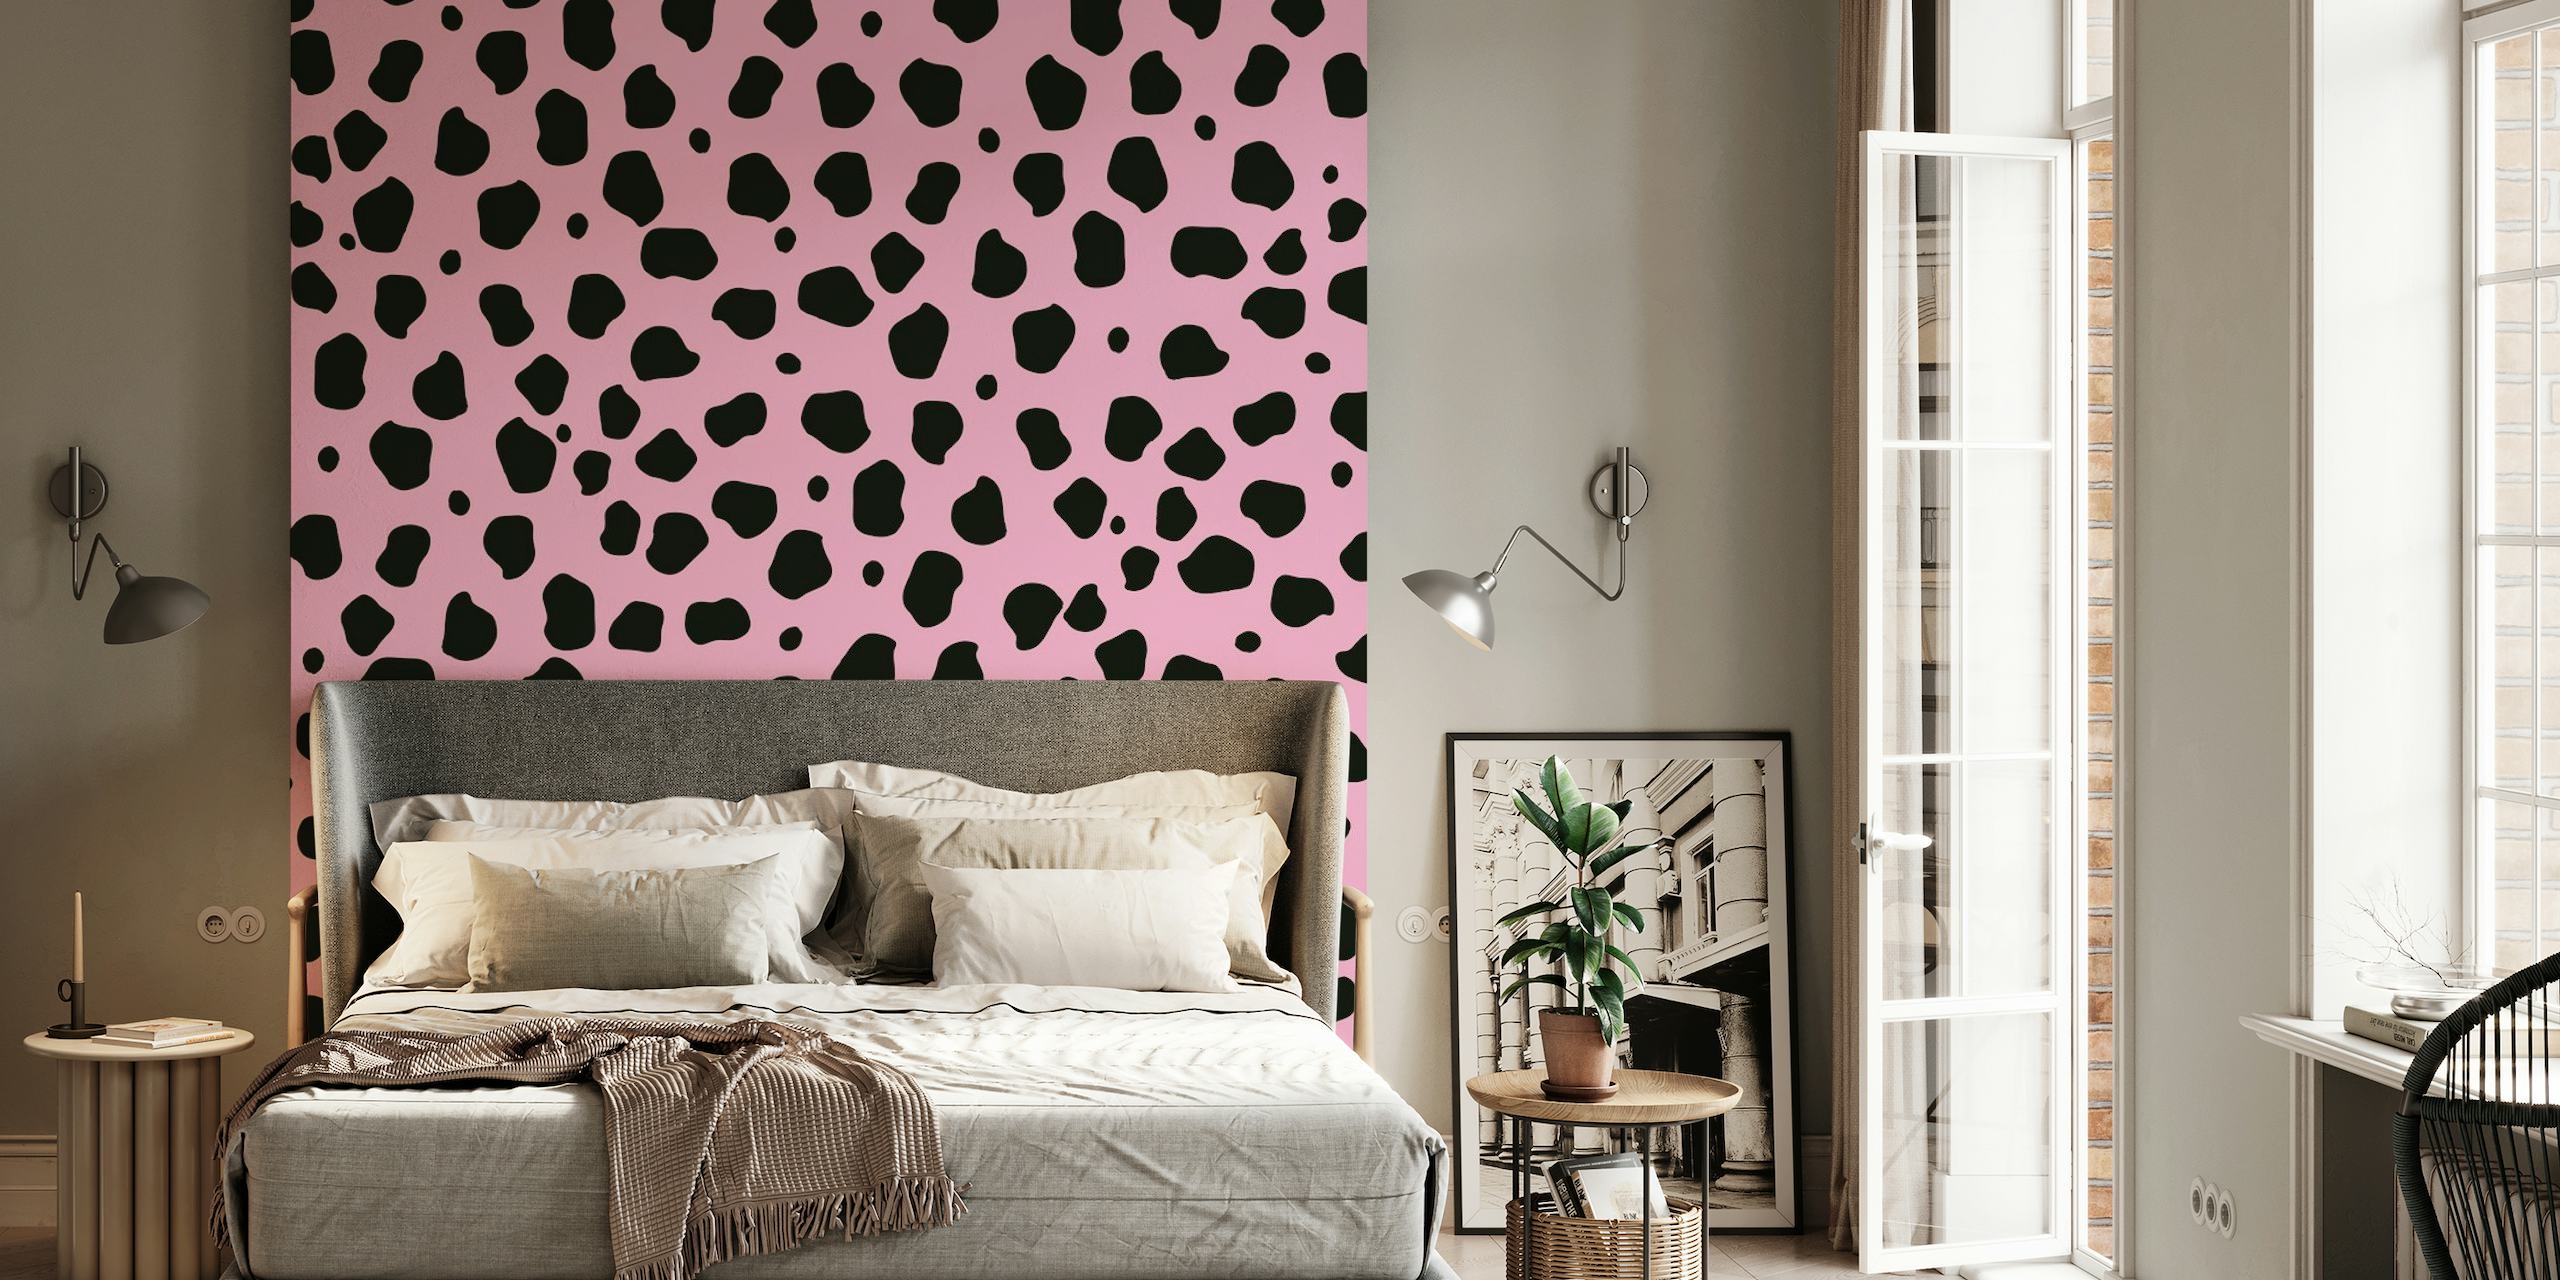 Black cheetah spots on a pink background wall mural